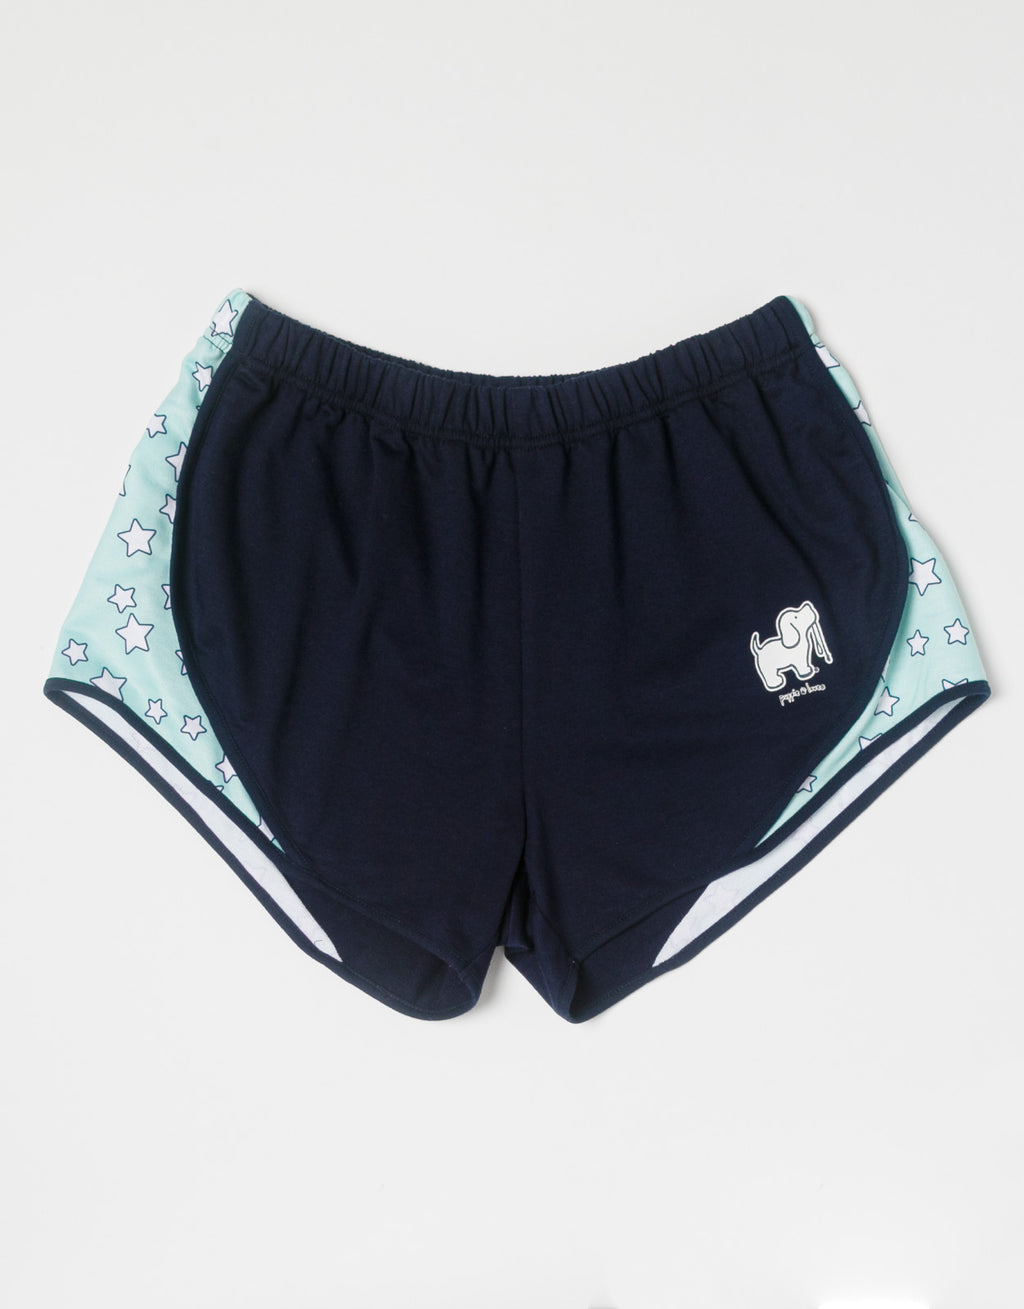 STARRY PUP SHORTS - Puppie Love